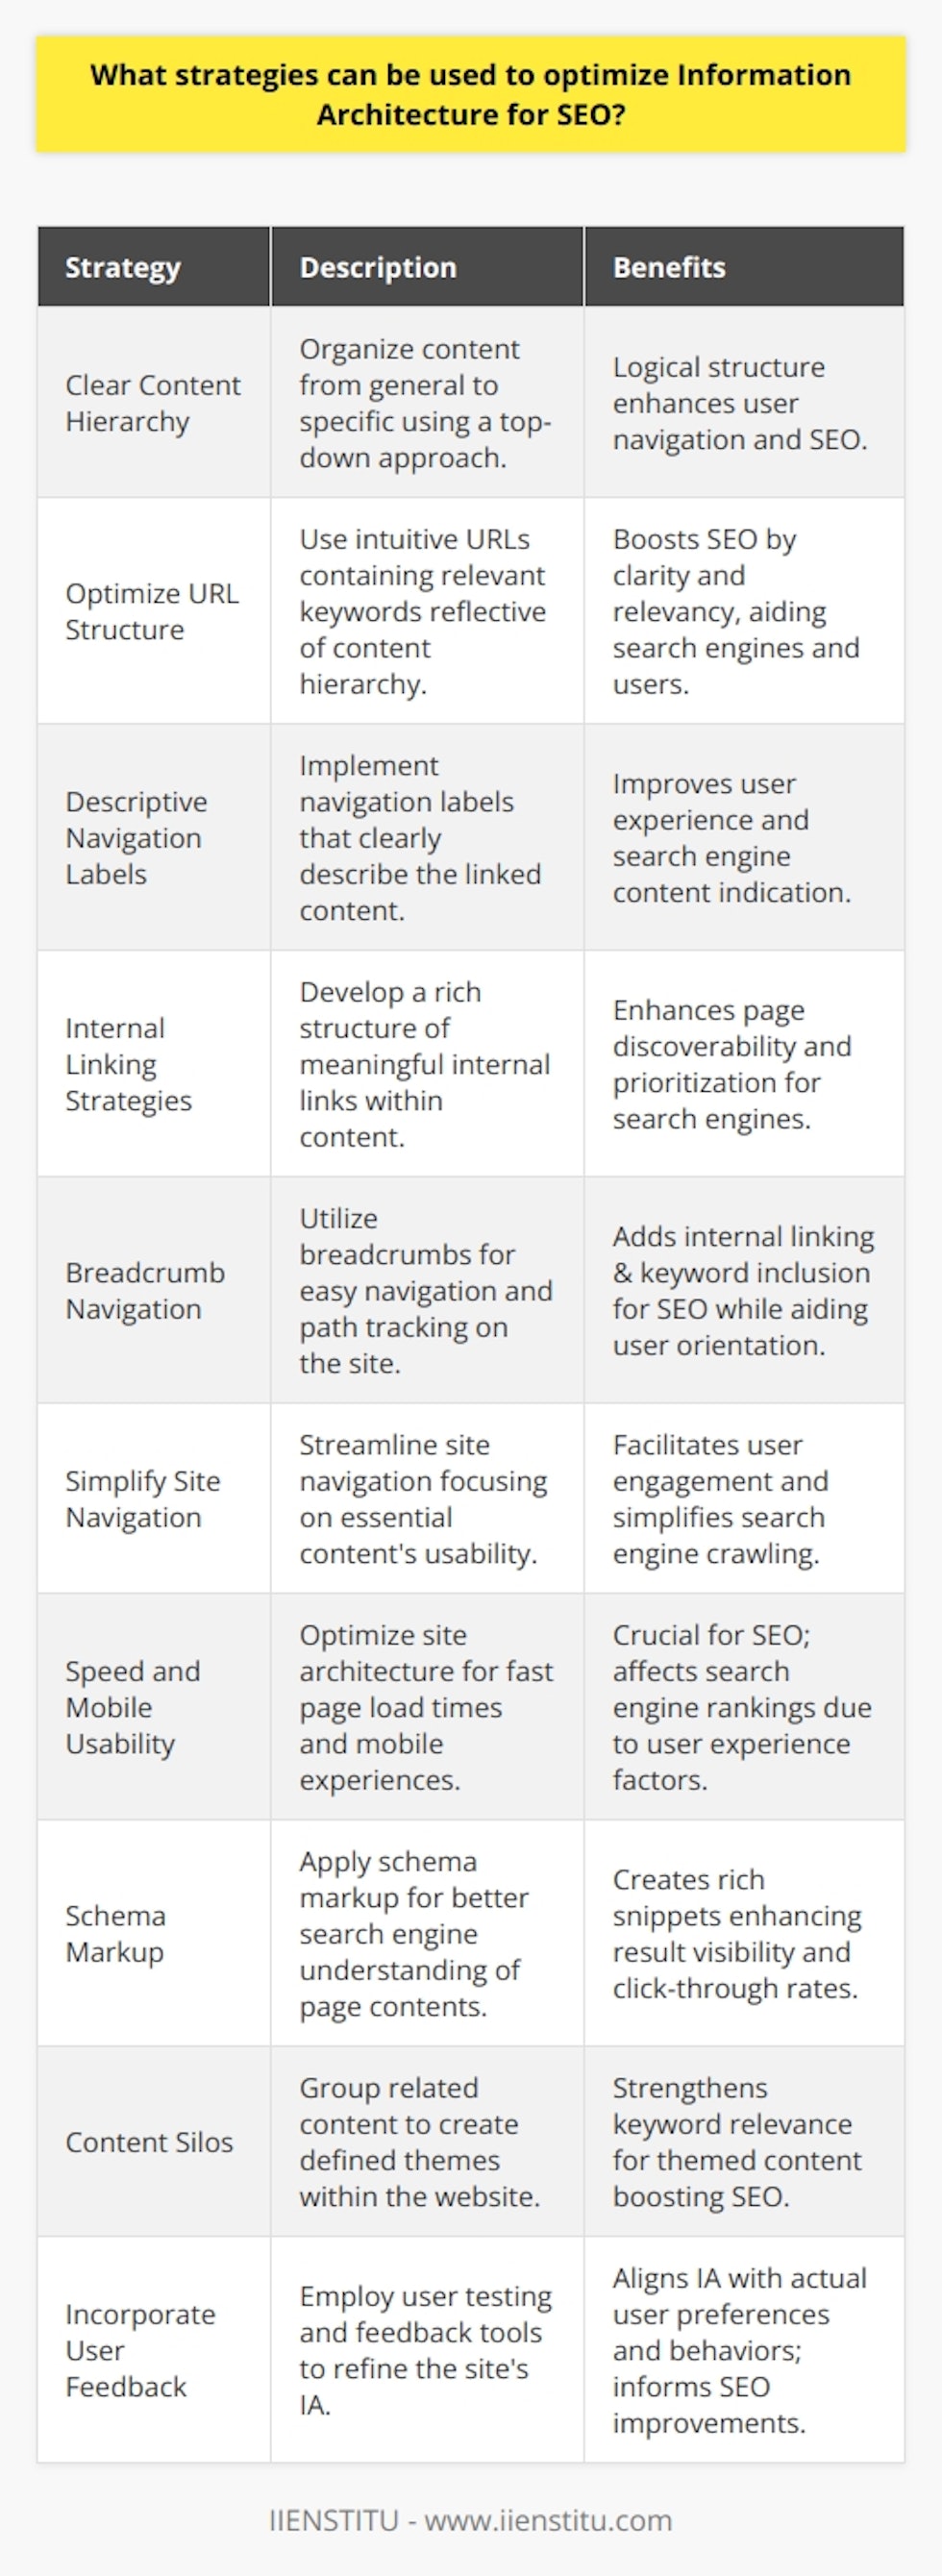 Effective information architecture (IA) considers how both users and search engines interact with a site. Optimizing IA for search engine optimization (SEO) involves a systematic approach to organizing content in a way that is not only user-friendly but also SEO-friendly. Here are strategies that can bolster your website's SEO through strategic IA:1. Establish a Clear Content Hierarchy:The foundation of good IA is a clear hierarchy that logically organizes content from general to specific. Implement a top-down approach, ensuring that broad categories are broken down into subcategories and then individual pages or posts.2. Optimize URL Structure:Search engines favor URLs that are easy to understand and reflect the content hierarchy of a website. URLs should be intuitive and include relevant keywords that provide both users and search engines with content clues.3. Use Descriptive Navigation Labels:Opt for clear, descriptive labels in your site navigation. This improves user experience and provides clear indicators to search engines about the content they can expect to find on a given page. Ambiguous labels can confuse both users and search engine crawlers.4. Implement Internal Linking Strategies:Creating a sensible structure of internal links strengthens the overall IA. Rich internal linking helps search engines discover new pages and determines which pages are most important, based on the frequency and context of links.5. Enhance Breadcrumb Navigation:Breadcrumbs are navigational aids that reveal the user's location on a site. Use them effectively for providing a clear path back to higher-level categories. They also contribute SEO benefits by adding another layer of internal linking and keyword use.6. Simplify Site Navigation:Complex navigation systems can overwhelm users and complicate the job of search engine crawlers. Streamline navigation by focusing on usability, making sure that the most important content is never more than a few clicks away.7. Improve Page Speed and Mobile Usability:Website speed and mobile-friendliness directly impact SEO. Ensure that the site architecture doesn't bog down loading times and is geared towards a seamless mobile experience, as these factors affect search engine rankings.8. Use Schema Markup to Define Content Structure:Schema markup helps search engines better interpret the contents and purpose of web pages by creating an enhanced description (commonly known as a rich snippet) that appears in search results.9. Leverage the Power of Content Silos:Building content silos involves grouping related content together to boost SEO. This strategy works by clearly defining content themes and dedicating sections of the site to these themes, which enhances keyword relevance.10. Incorporate User Feedback:Use user testing, heatmaps, and other feedback tools to understand how real users interact with your site's IA. This information can be invaluable in refining an information structure that serves both SEO and user needs.Optimizing the IA of a website demands diligence and a deep understanding of both user behavior and SEO principles. For those further interested in mastering the digital environment, IIENSTITU offers various courses and articles that delve deeper into such practices, providing extensive knowledge to augment digital skillsets. Applying these strategies should result in a cohesive structure for your website that enhances discoverability, user engagement, and ultimately, search engine rankings.